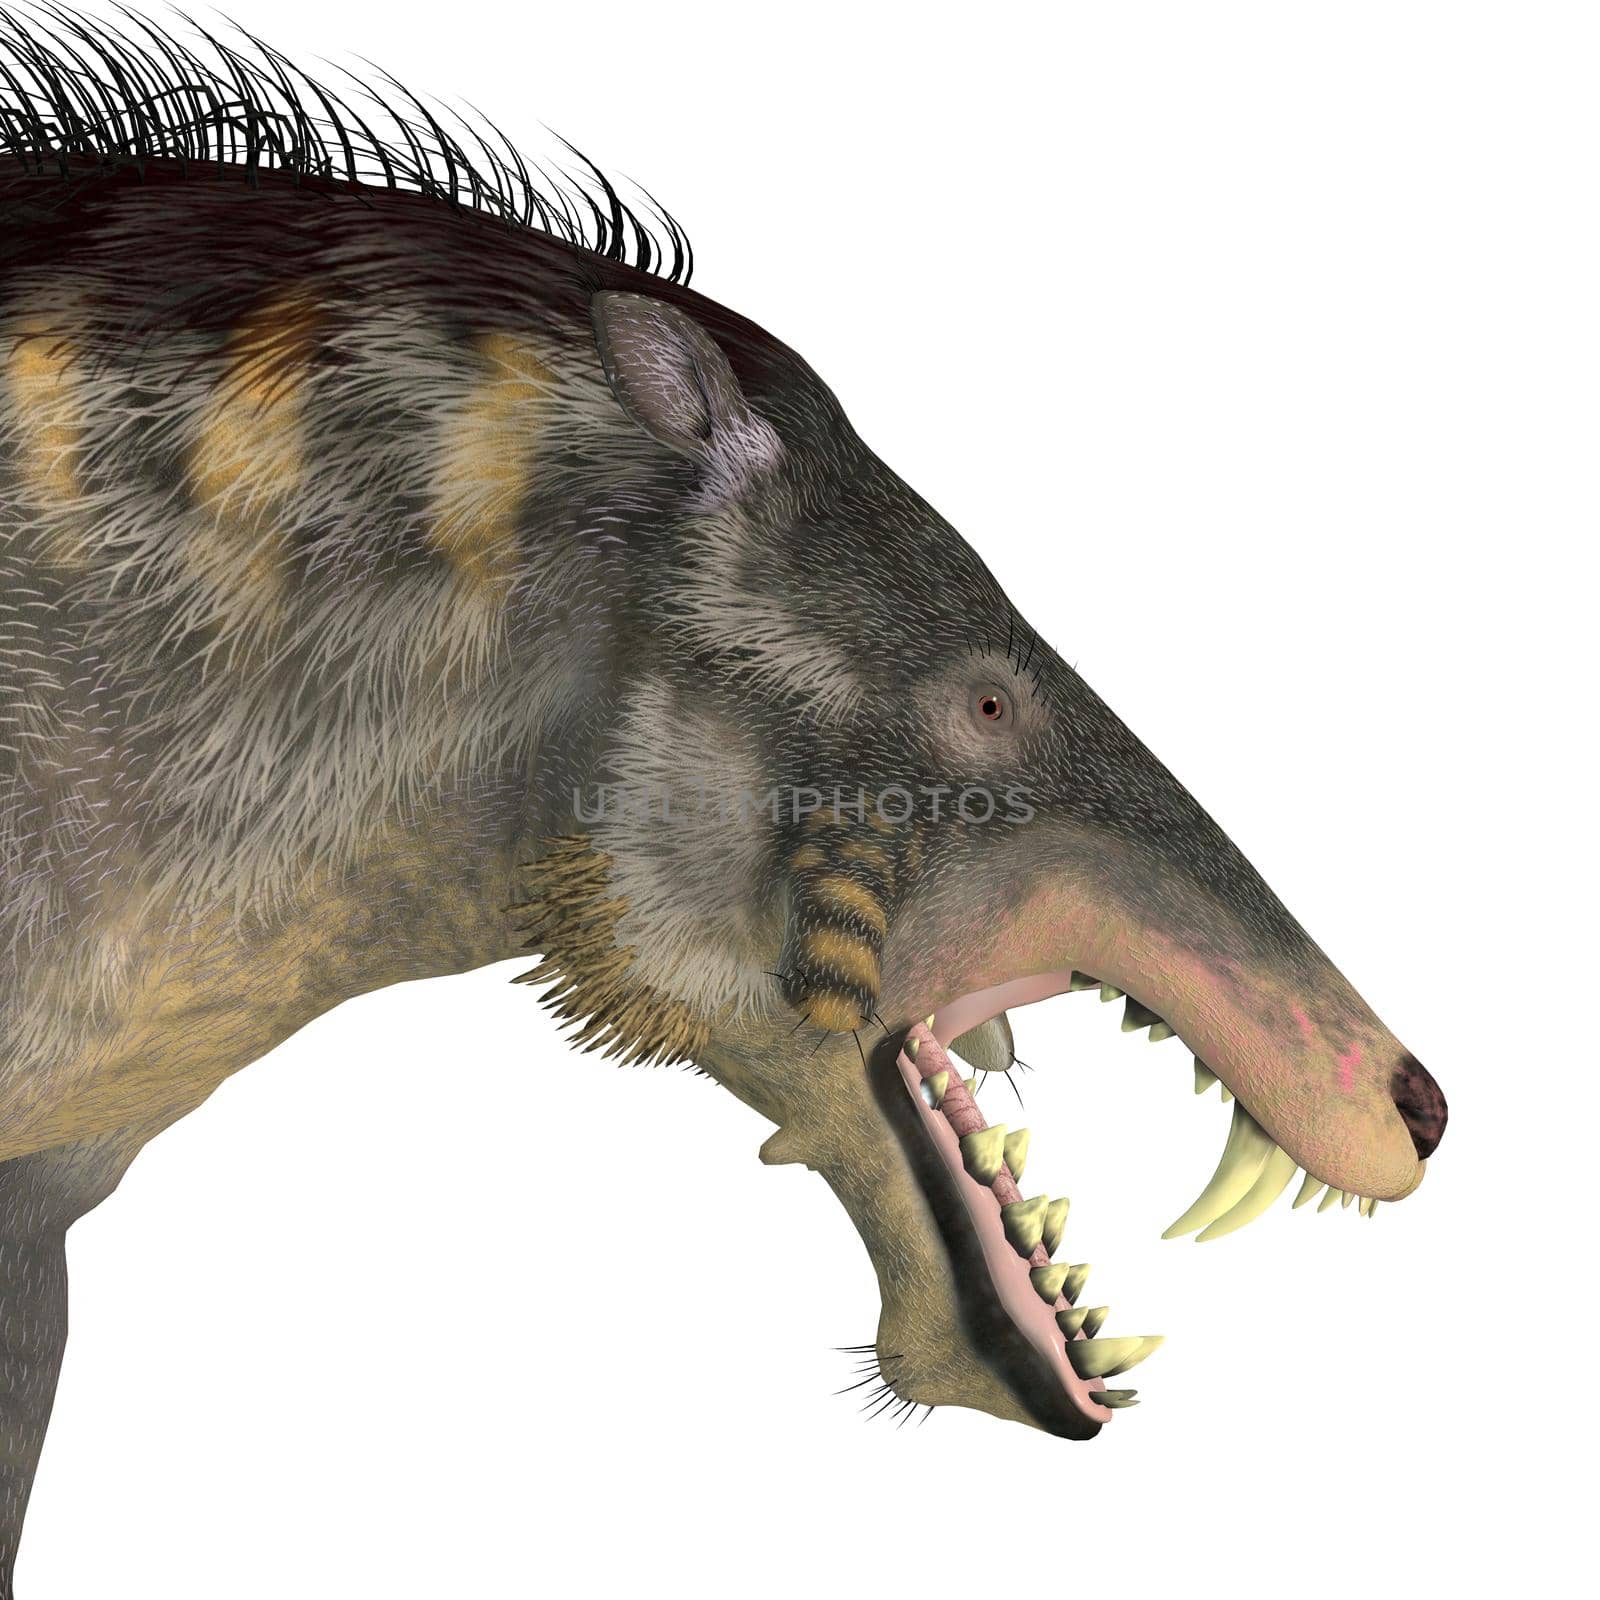 Entelodont was an omnivorous pig that lived during the Eocene and Oligocene Periods of Europe, Eurasia and Asia.